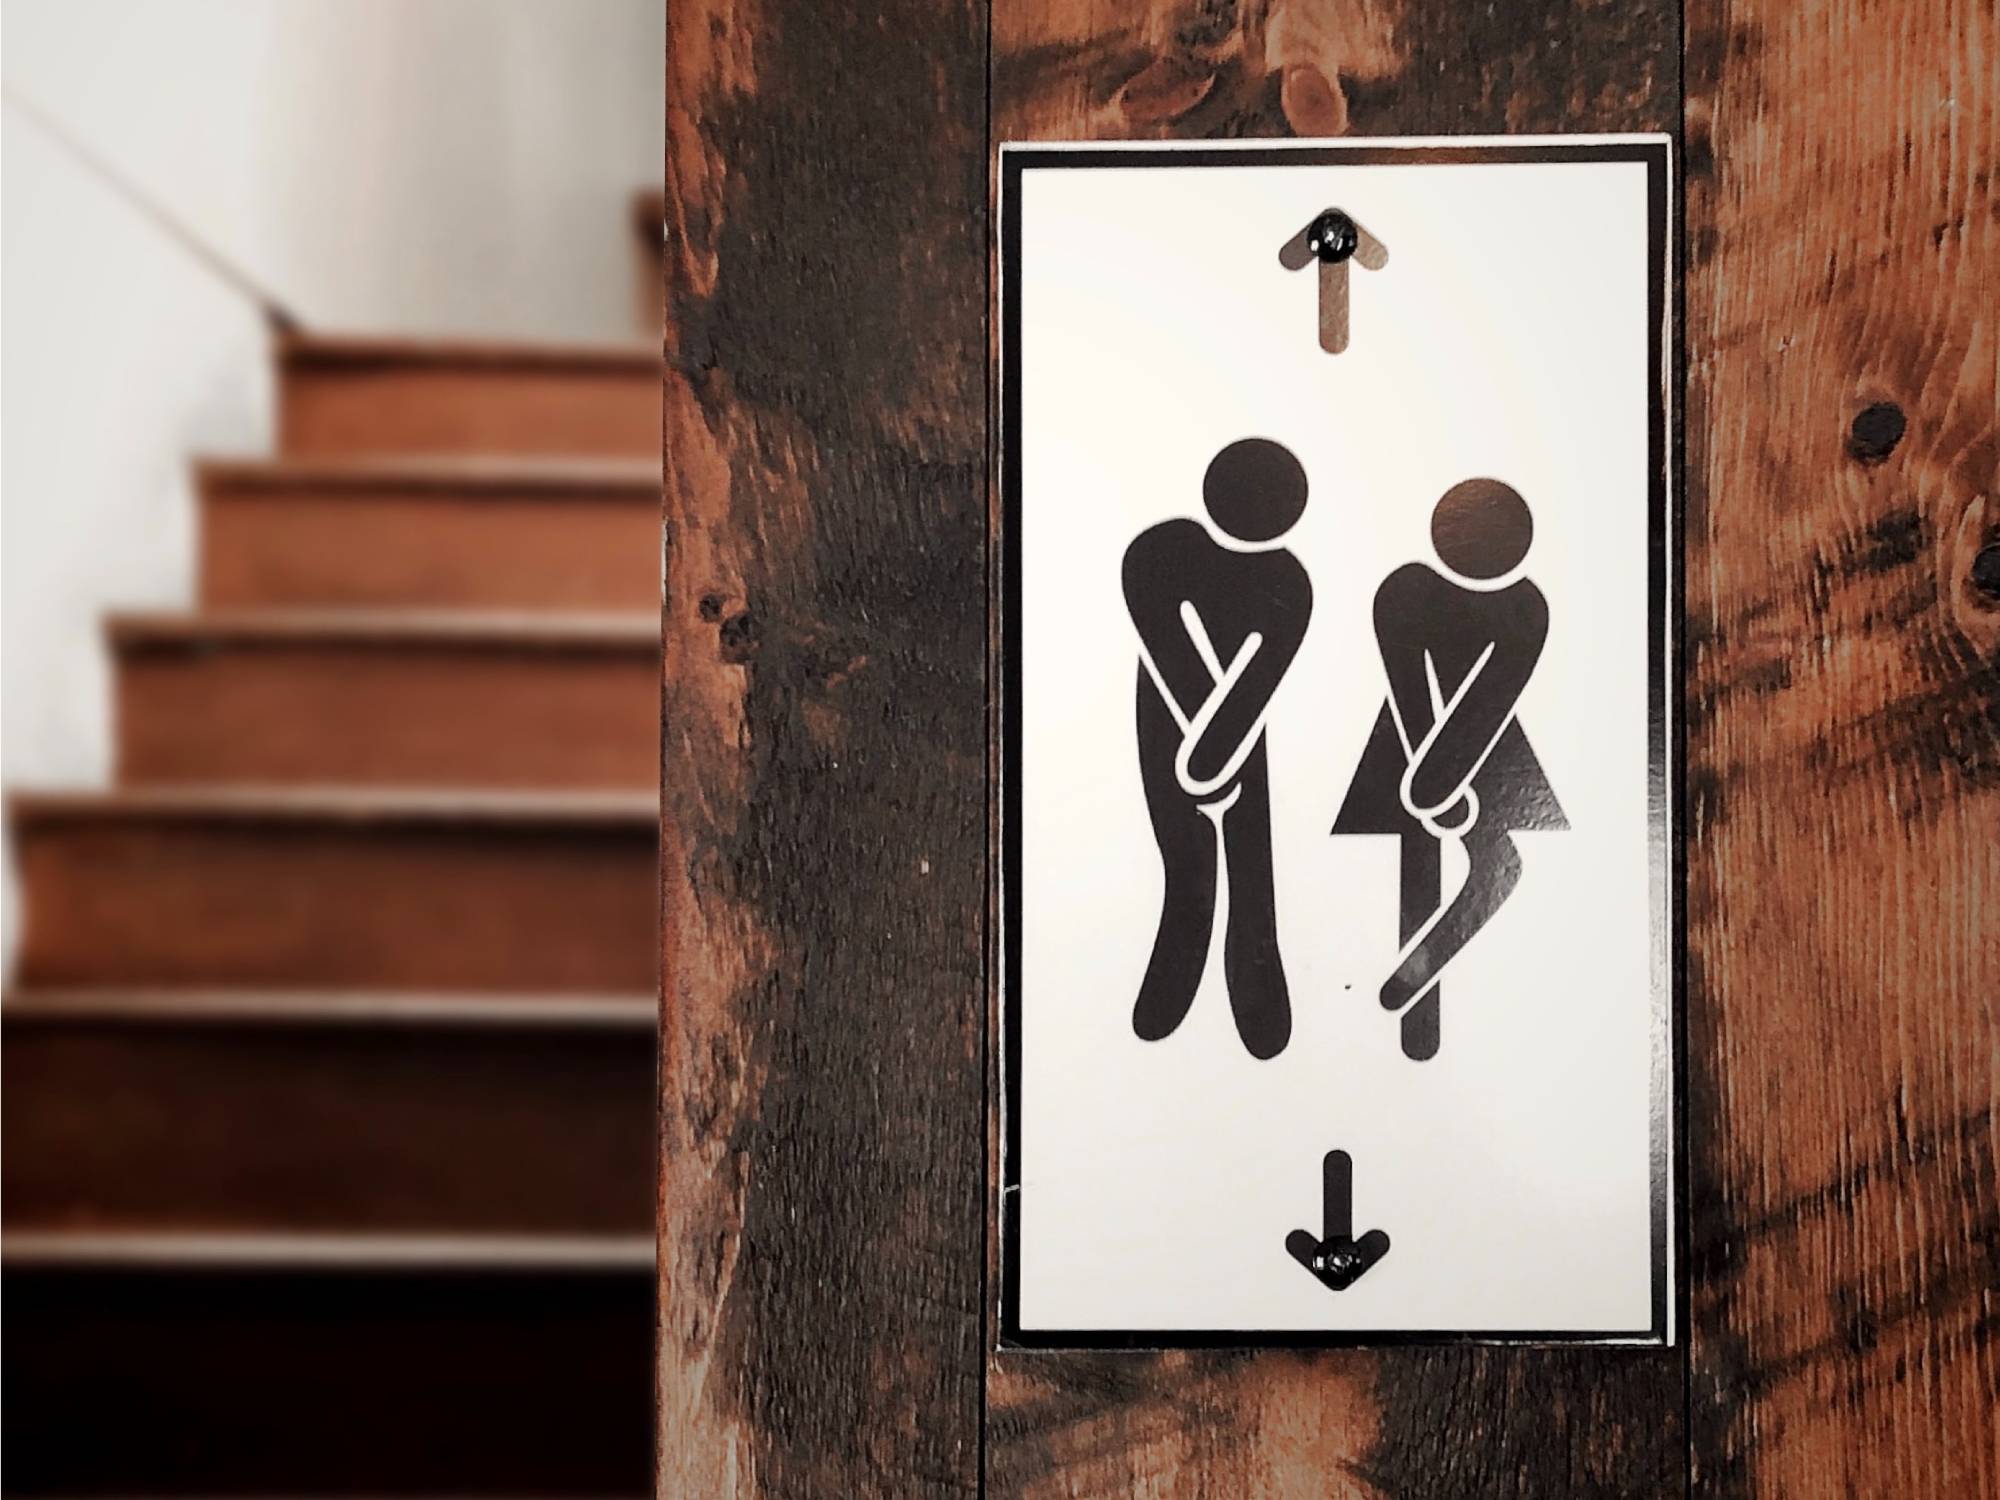 Restroom sign with figures in a holding position